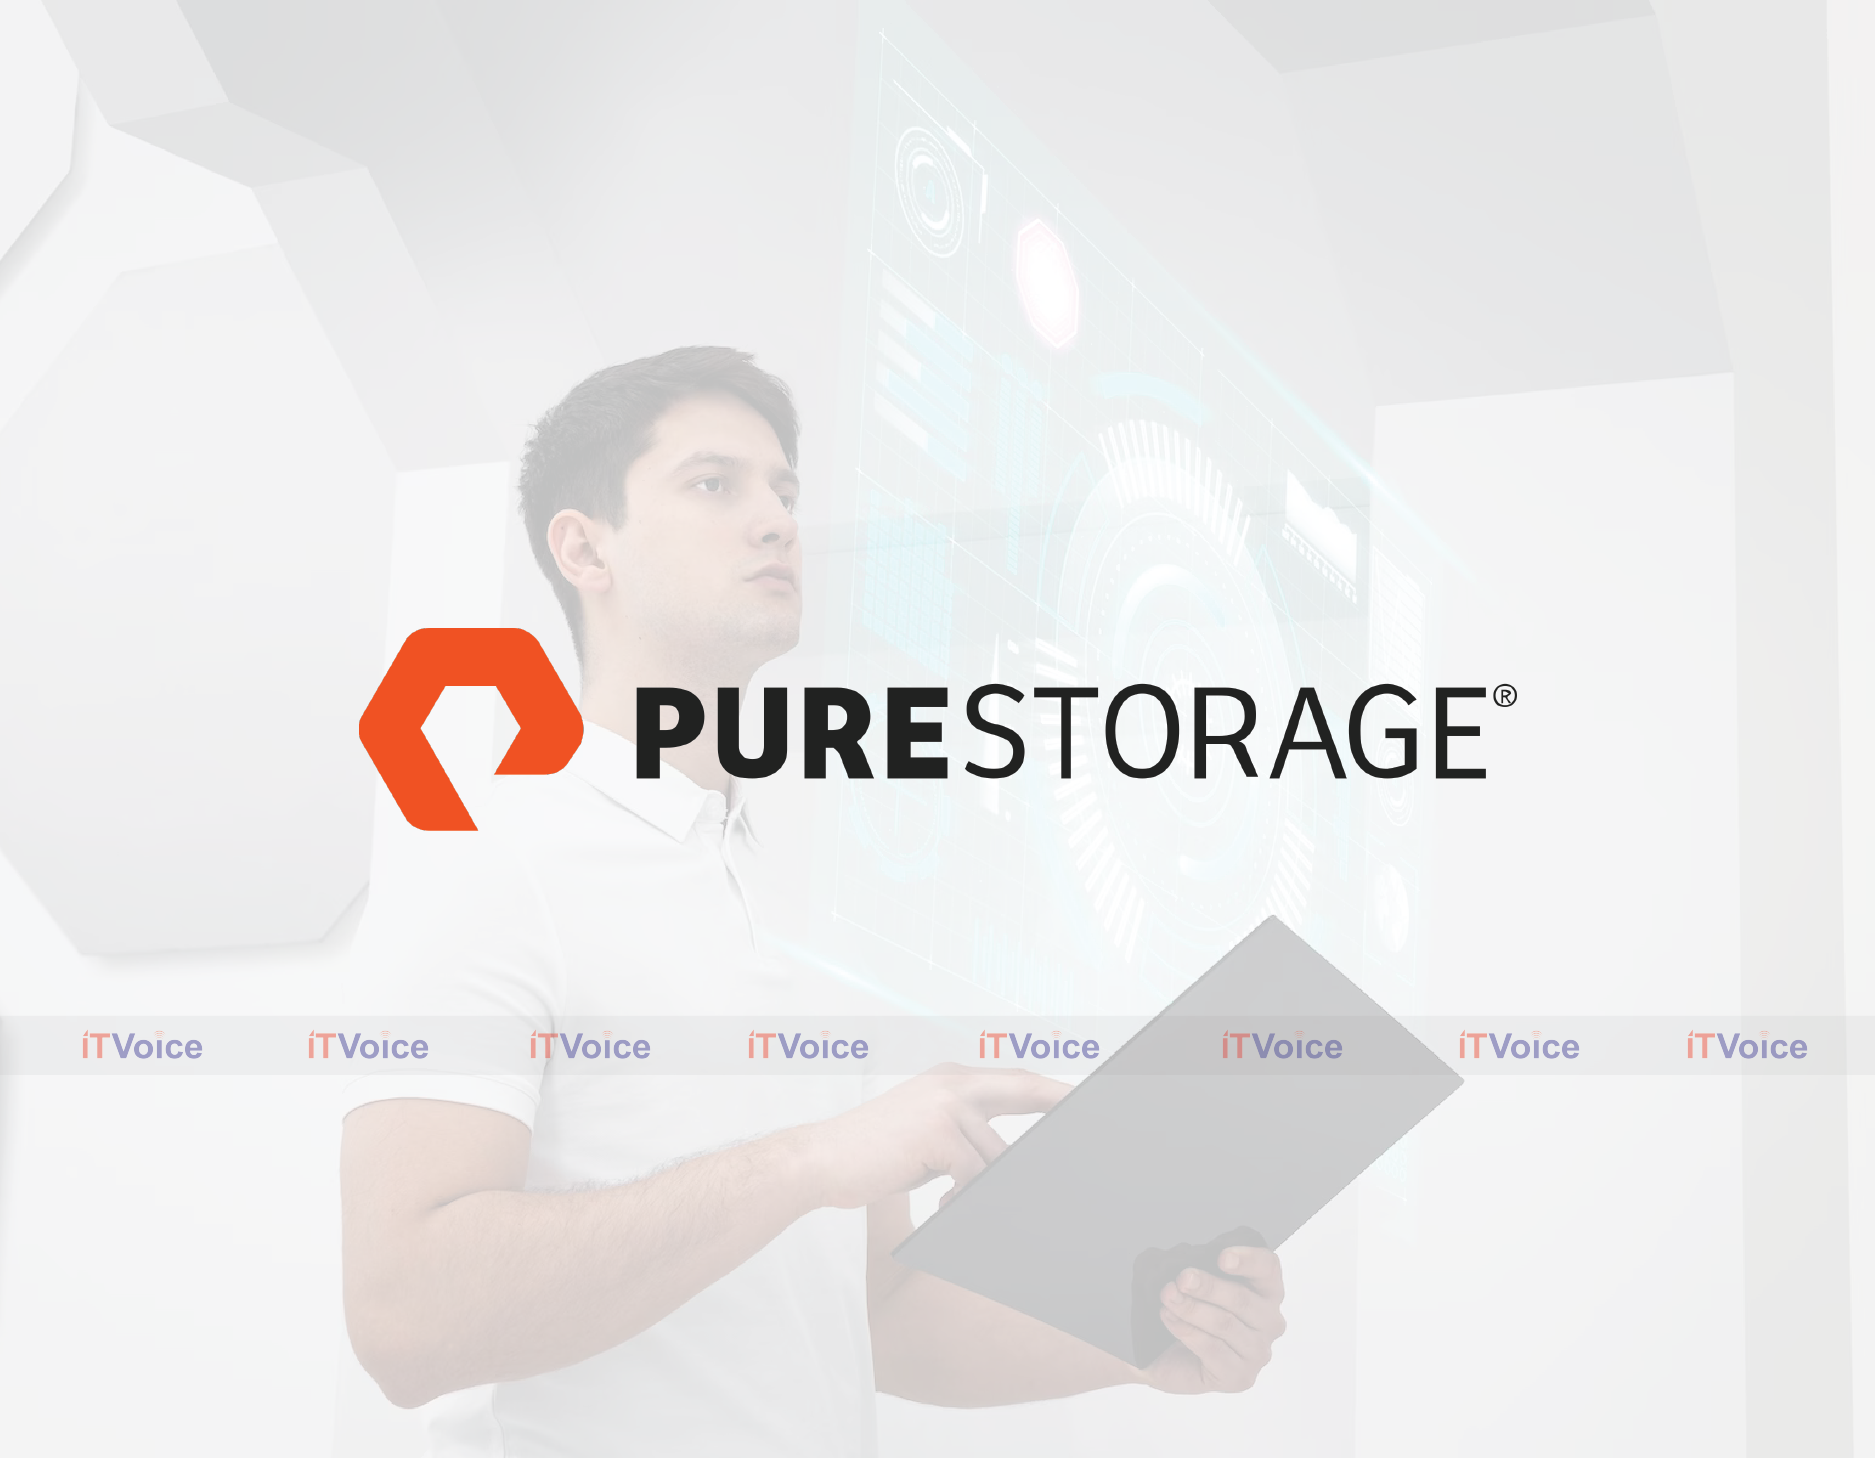 New Pure Storage Survey Underscores Importance of IT Modernization to Support New Technology Initiatives